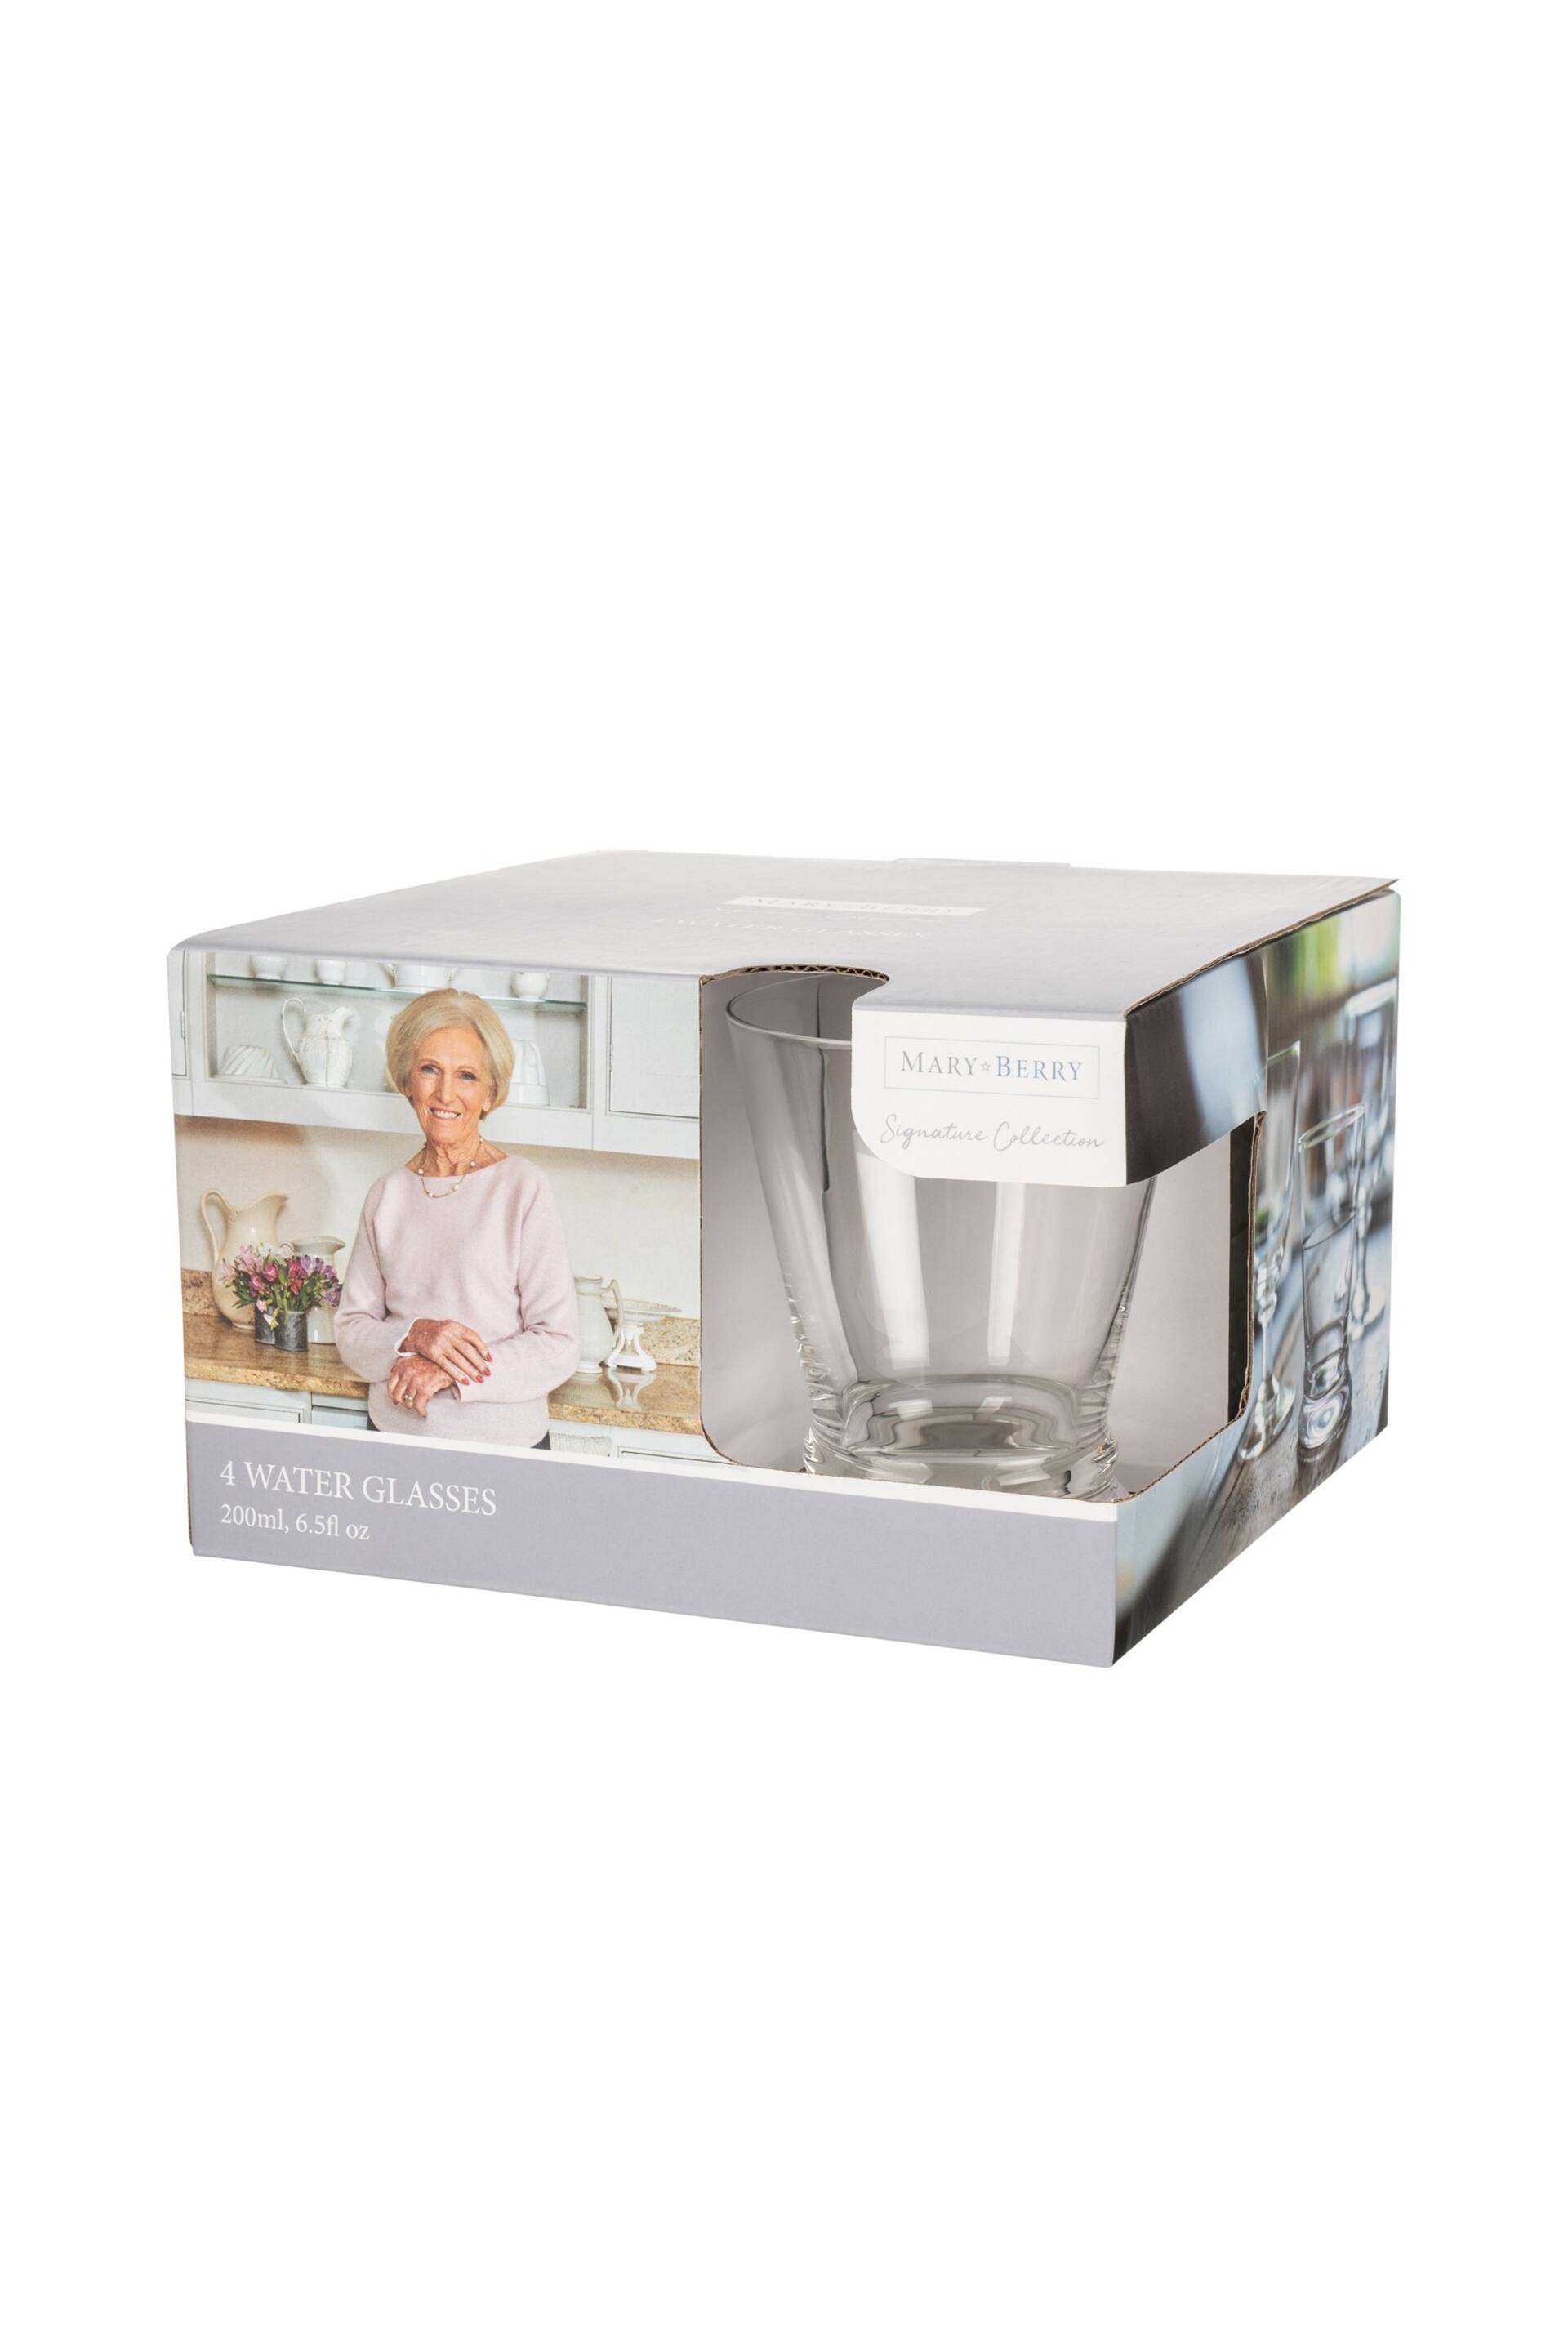 Mary Berry Set of 4 Clear Signature Tumbler Glasses - Image 4 of 4